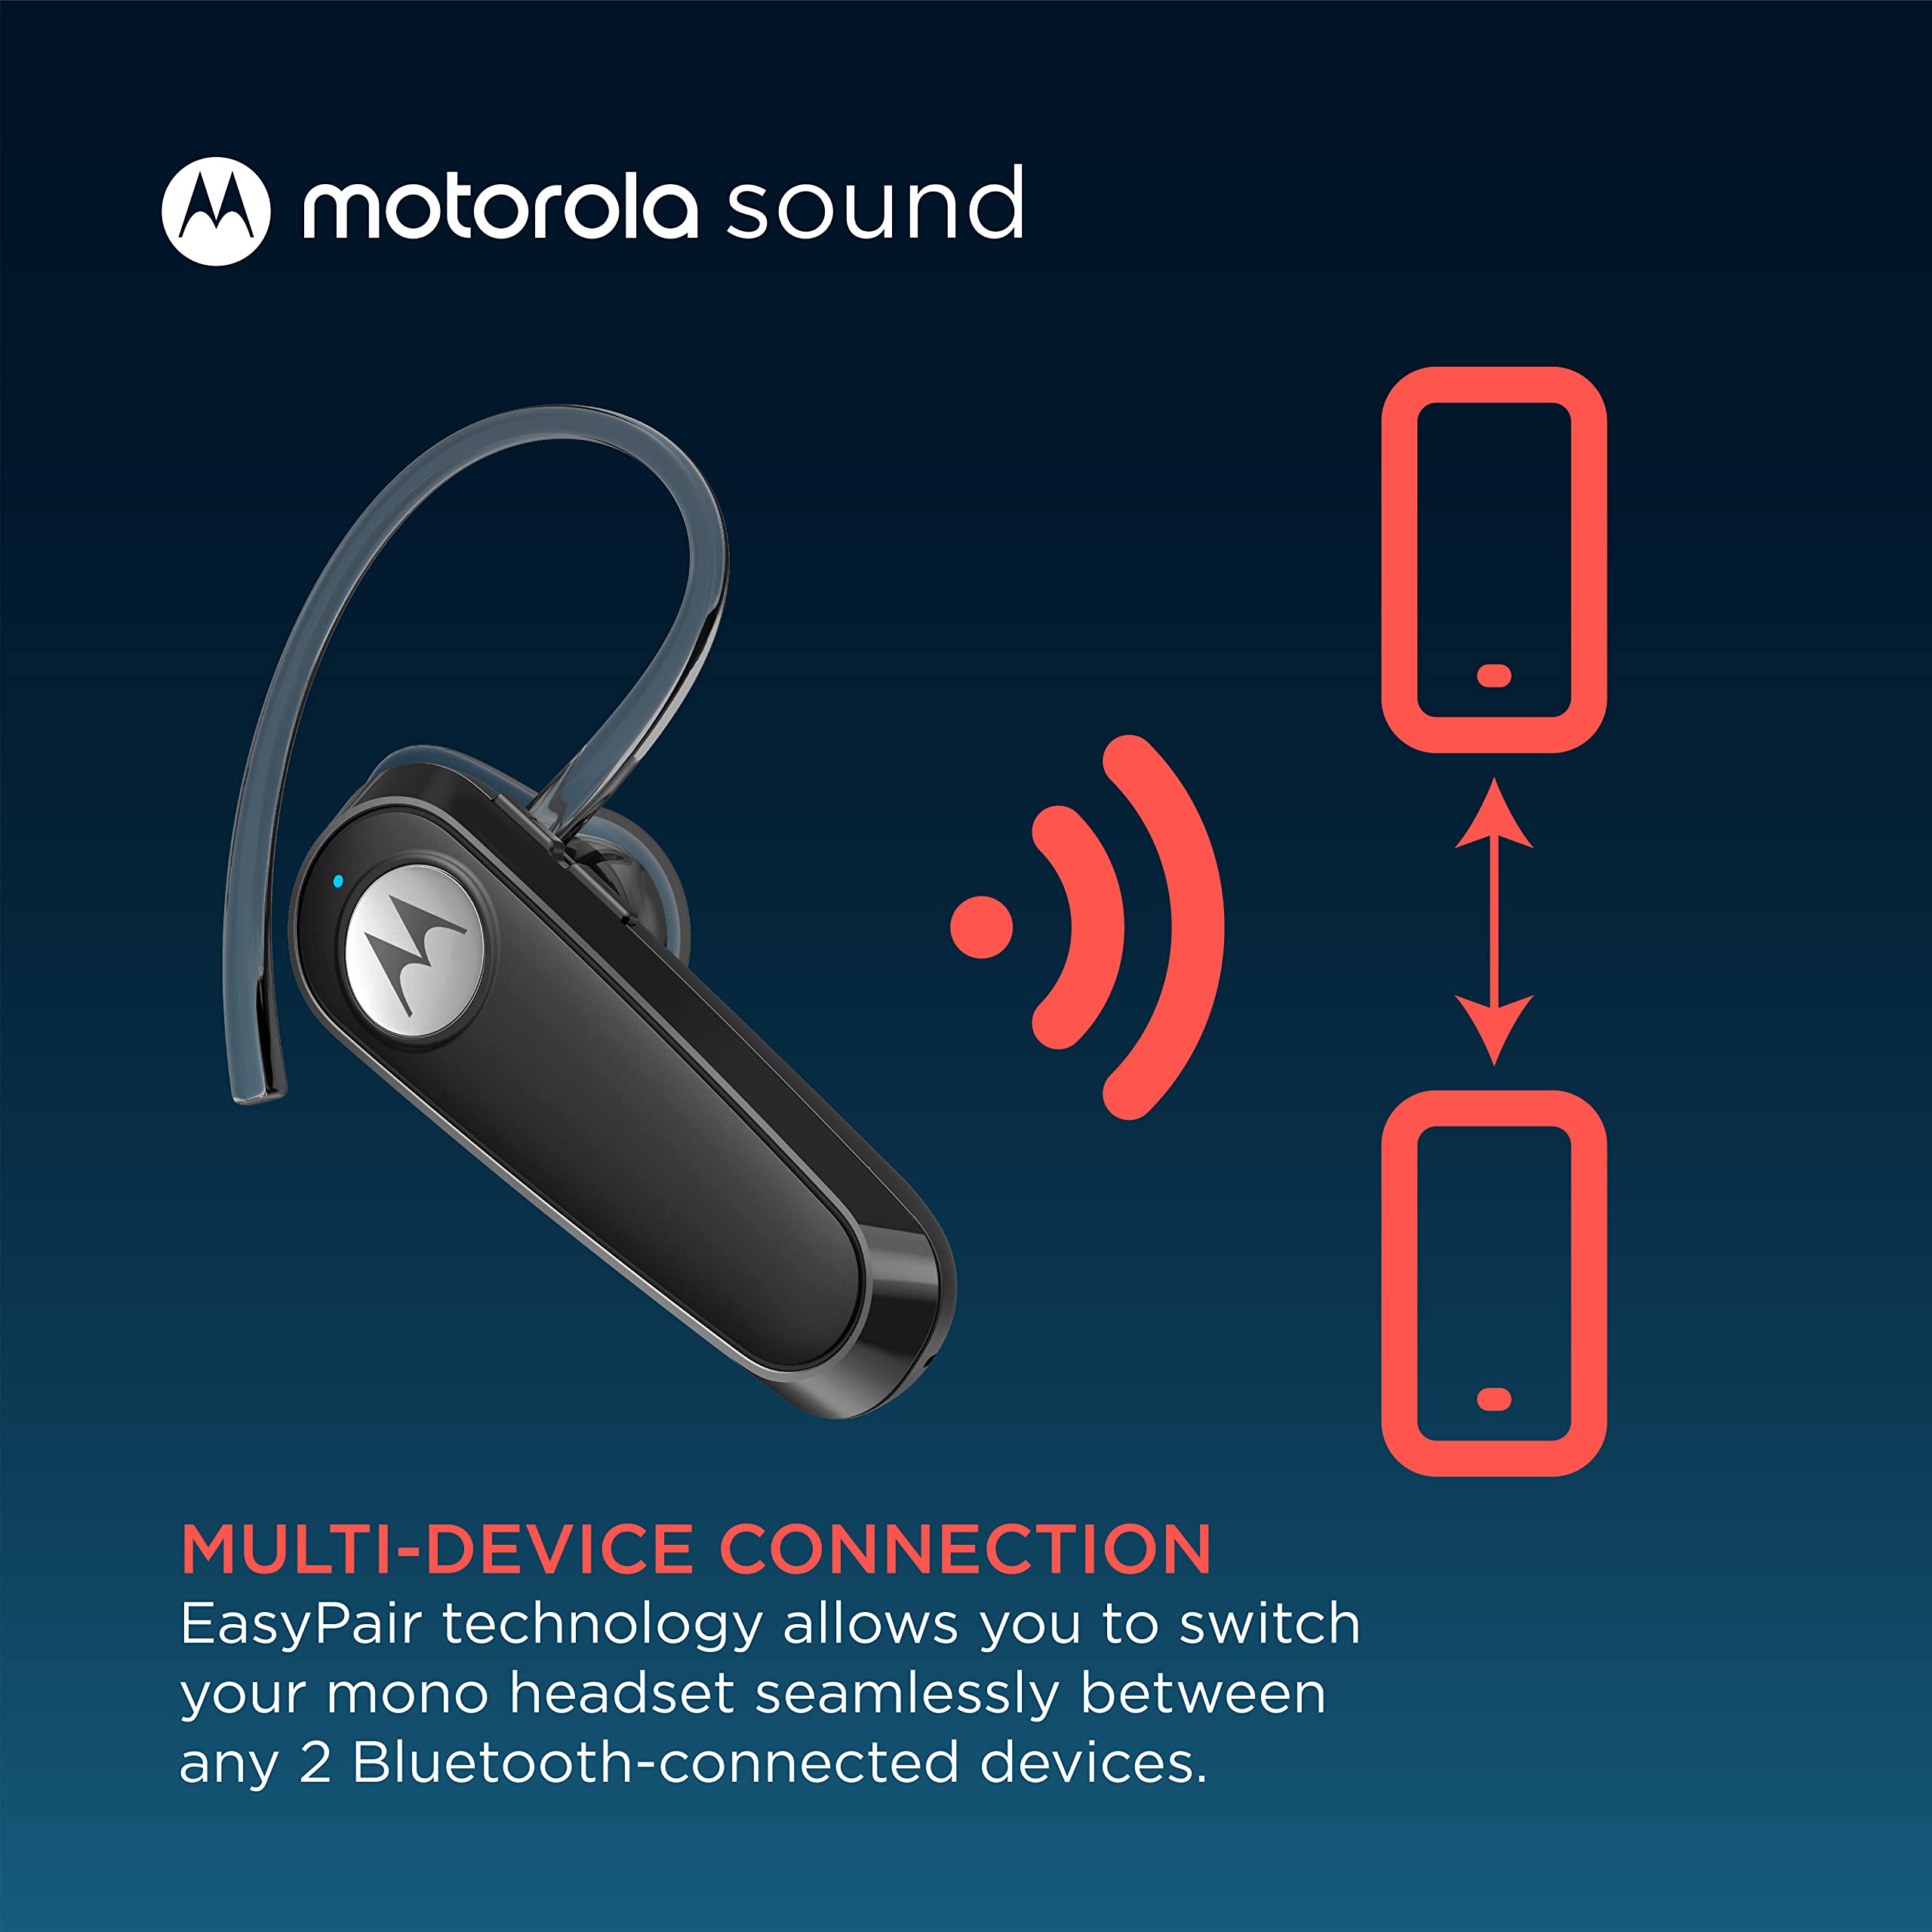 Motorola Bluetooth Earpiece - HK126 in-Ear Wireless Mono Headset for Clear Voice Calls - Lightweight, Comfortable Design - 8-Hour Talk Time, Voice Assistant Compatible, Connects to 2 Devices